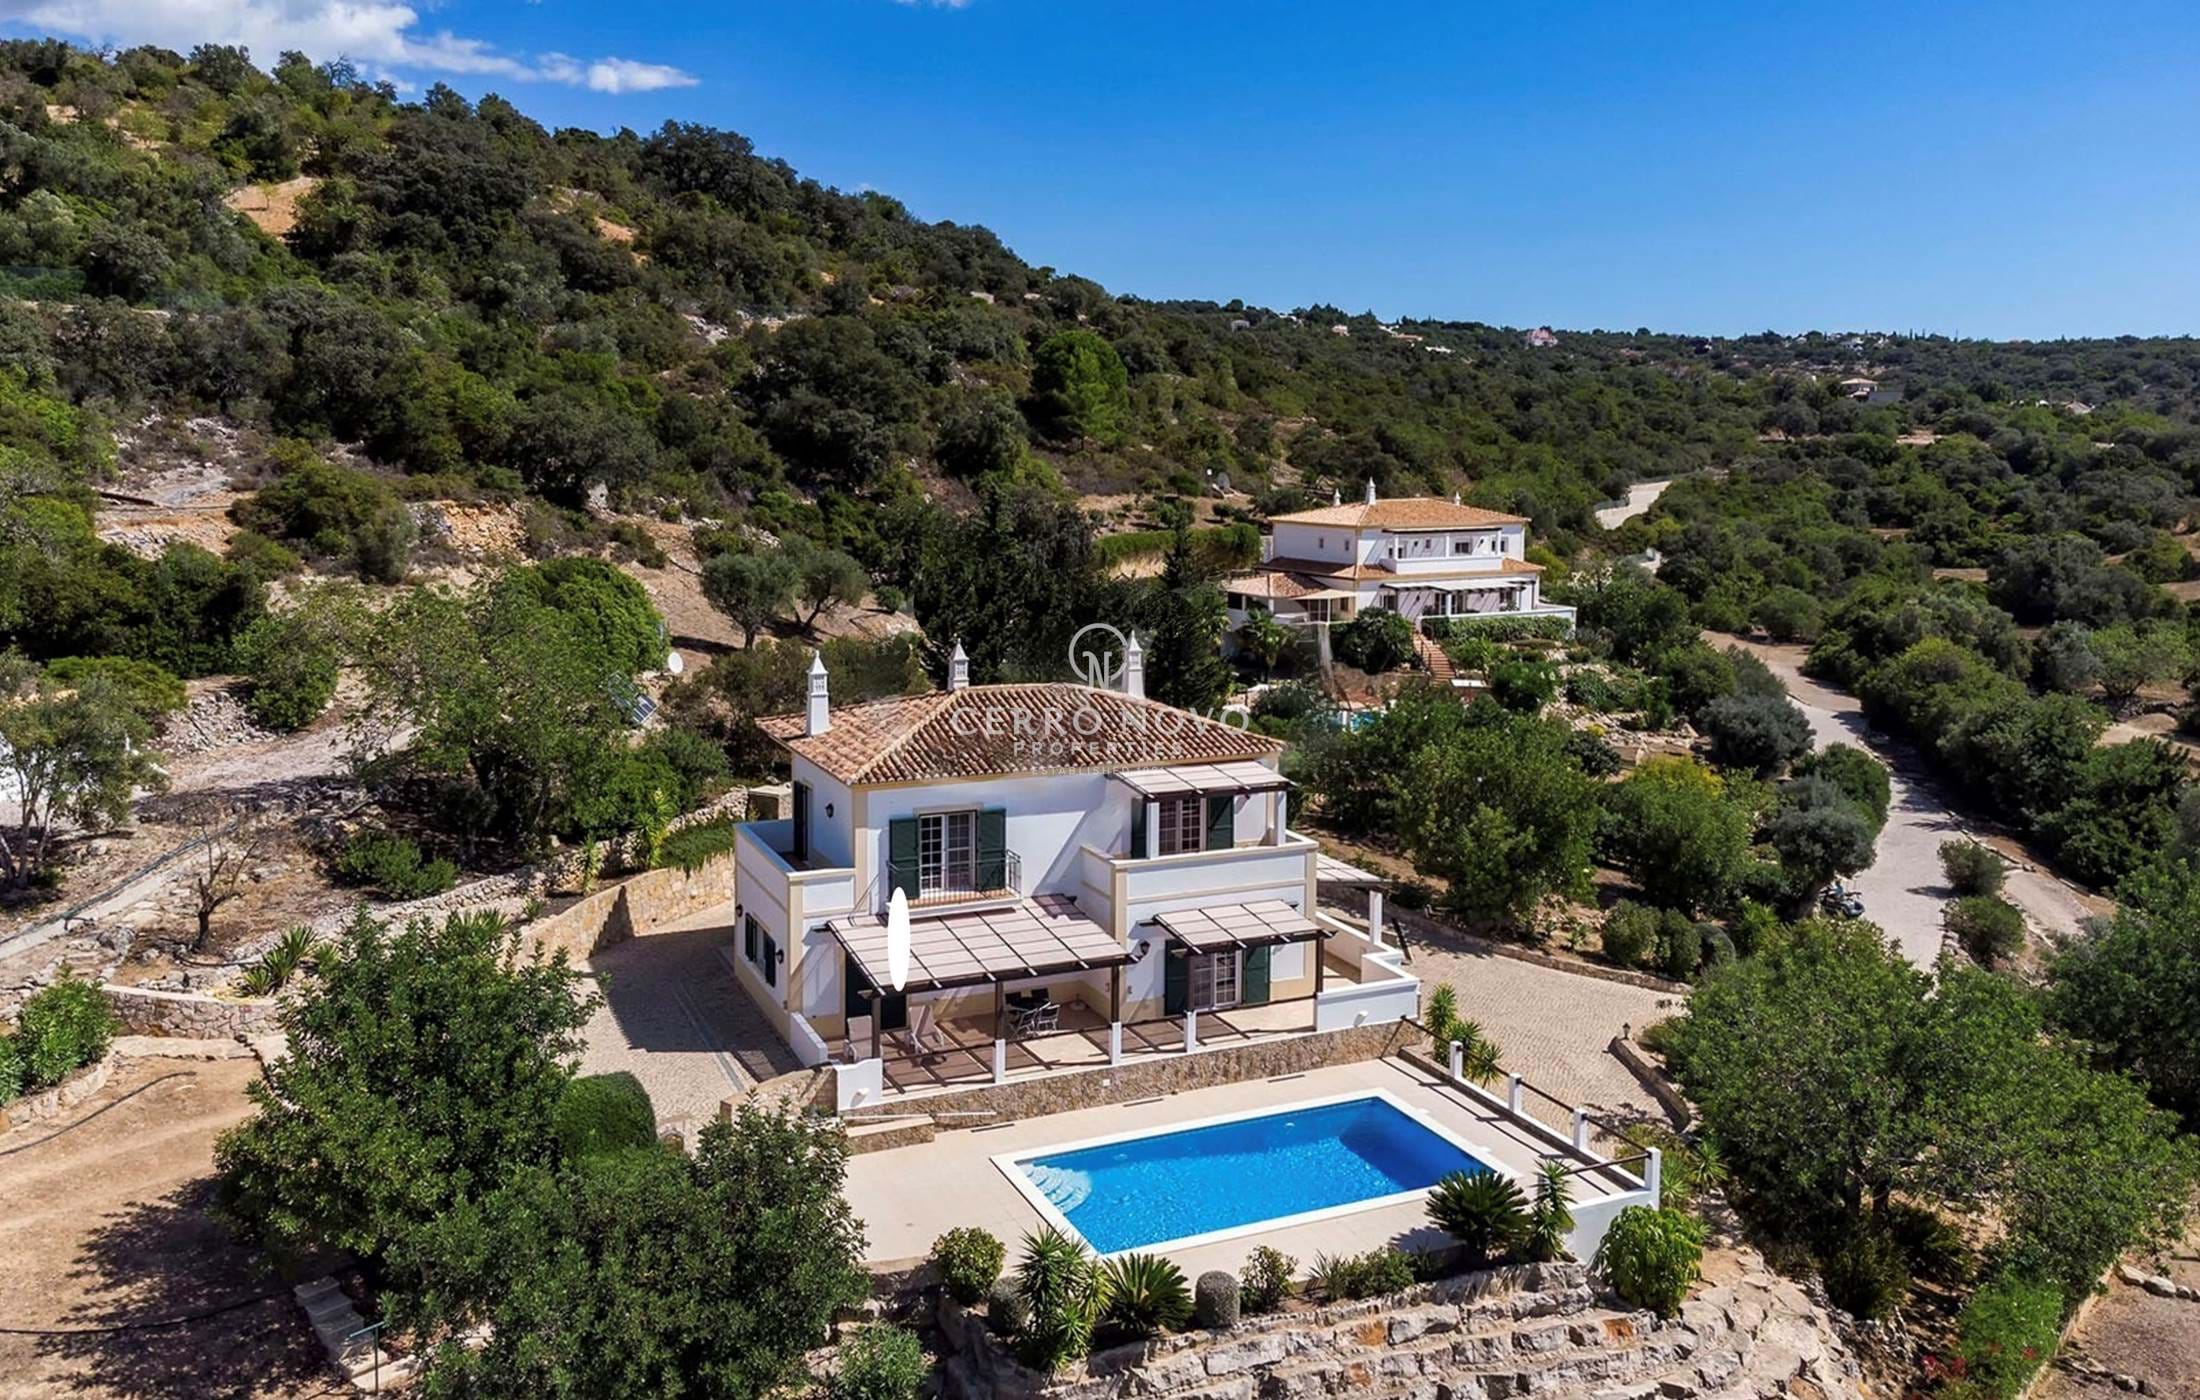 A fabulous estate that comprises two beautiful traditional villas within 53,000 m2 of countryside.